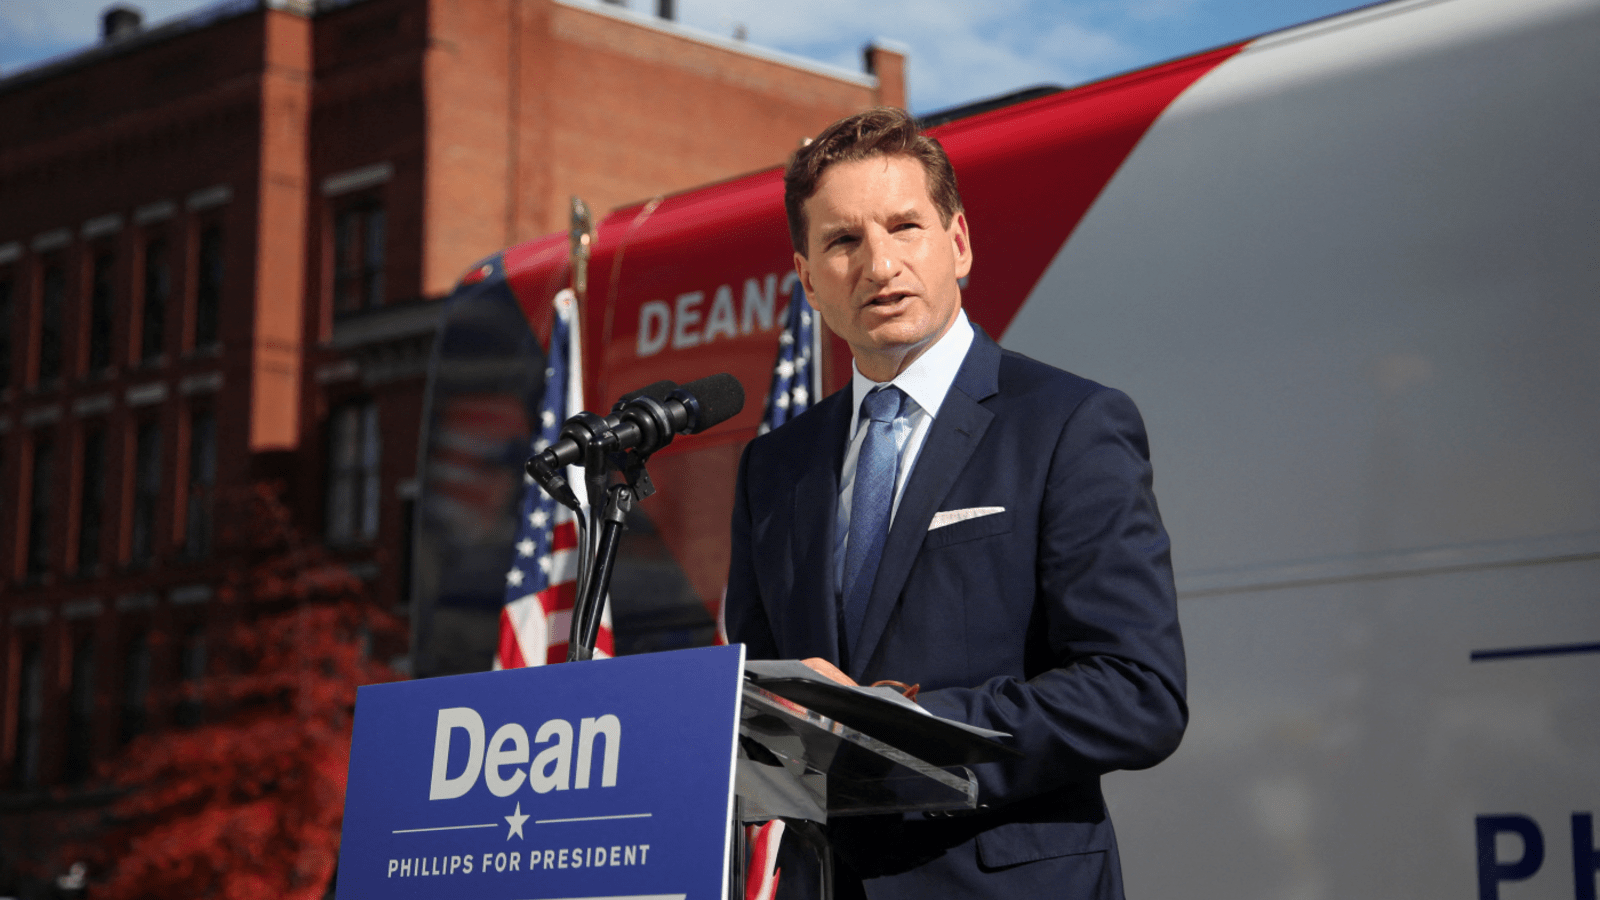 Meet Dean Phillips, Democratic Presidential Candidate Council on